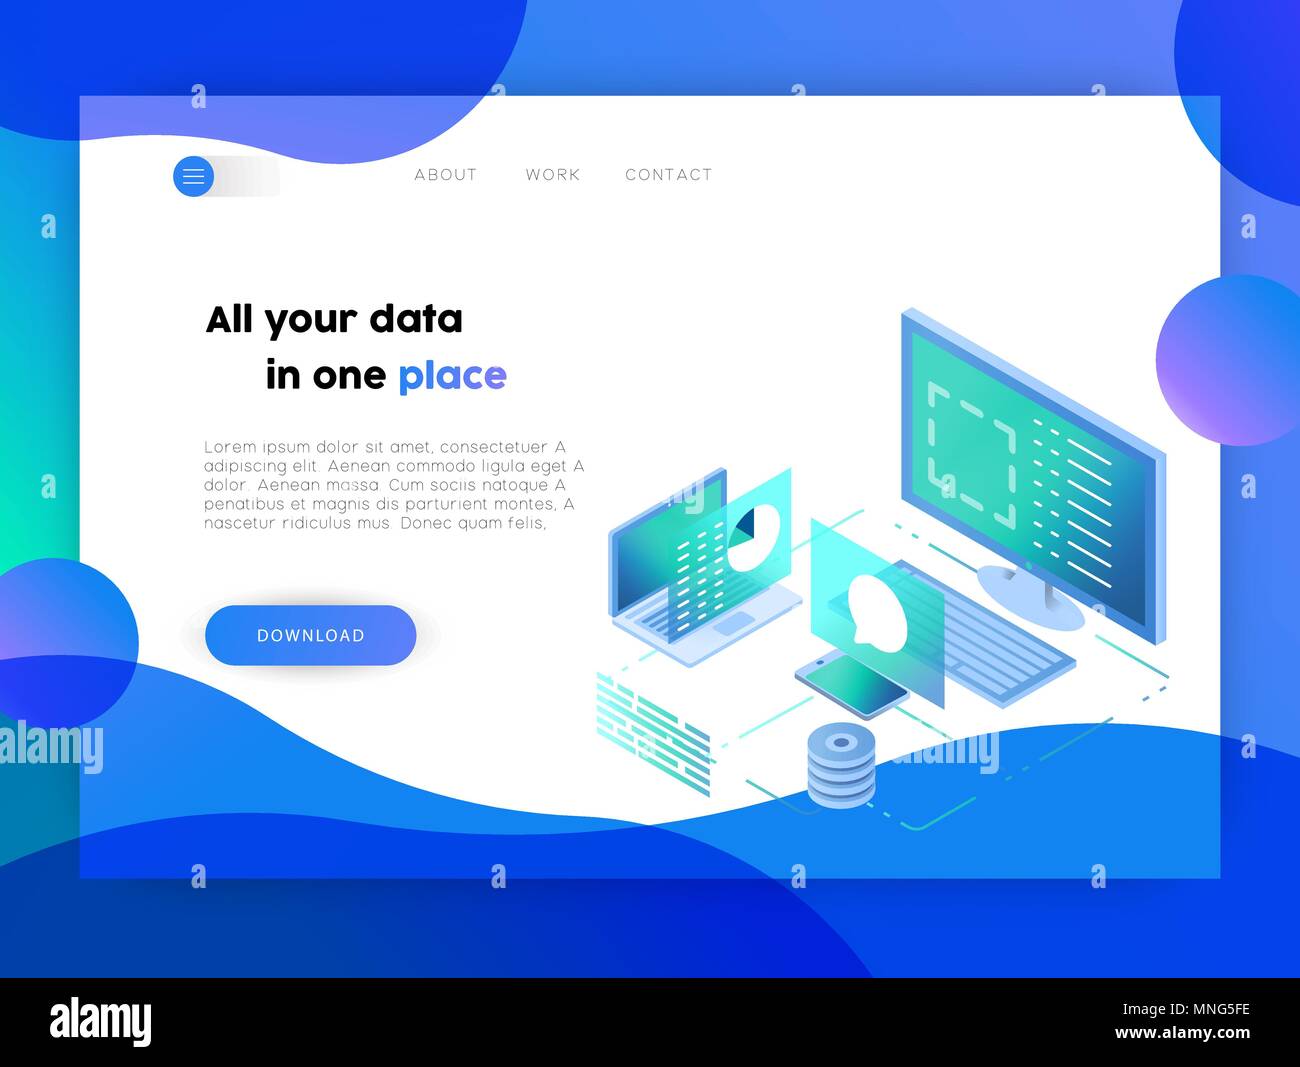 Web business landing page template. Online technology layout with computer data isometric illustration and app download button. EPS10 vector. Stock Vector